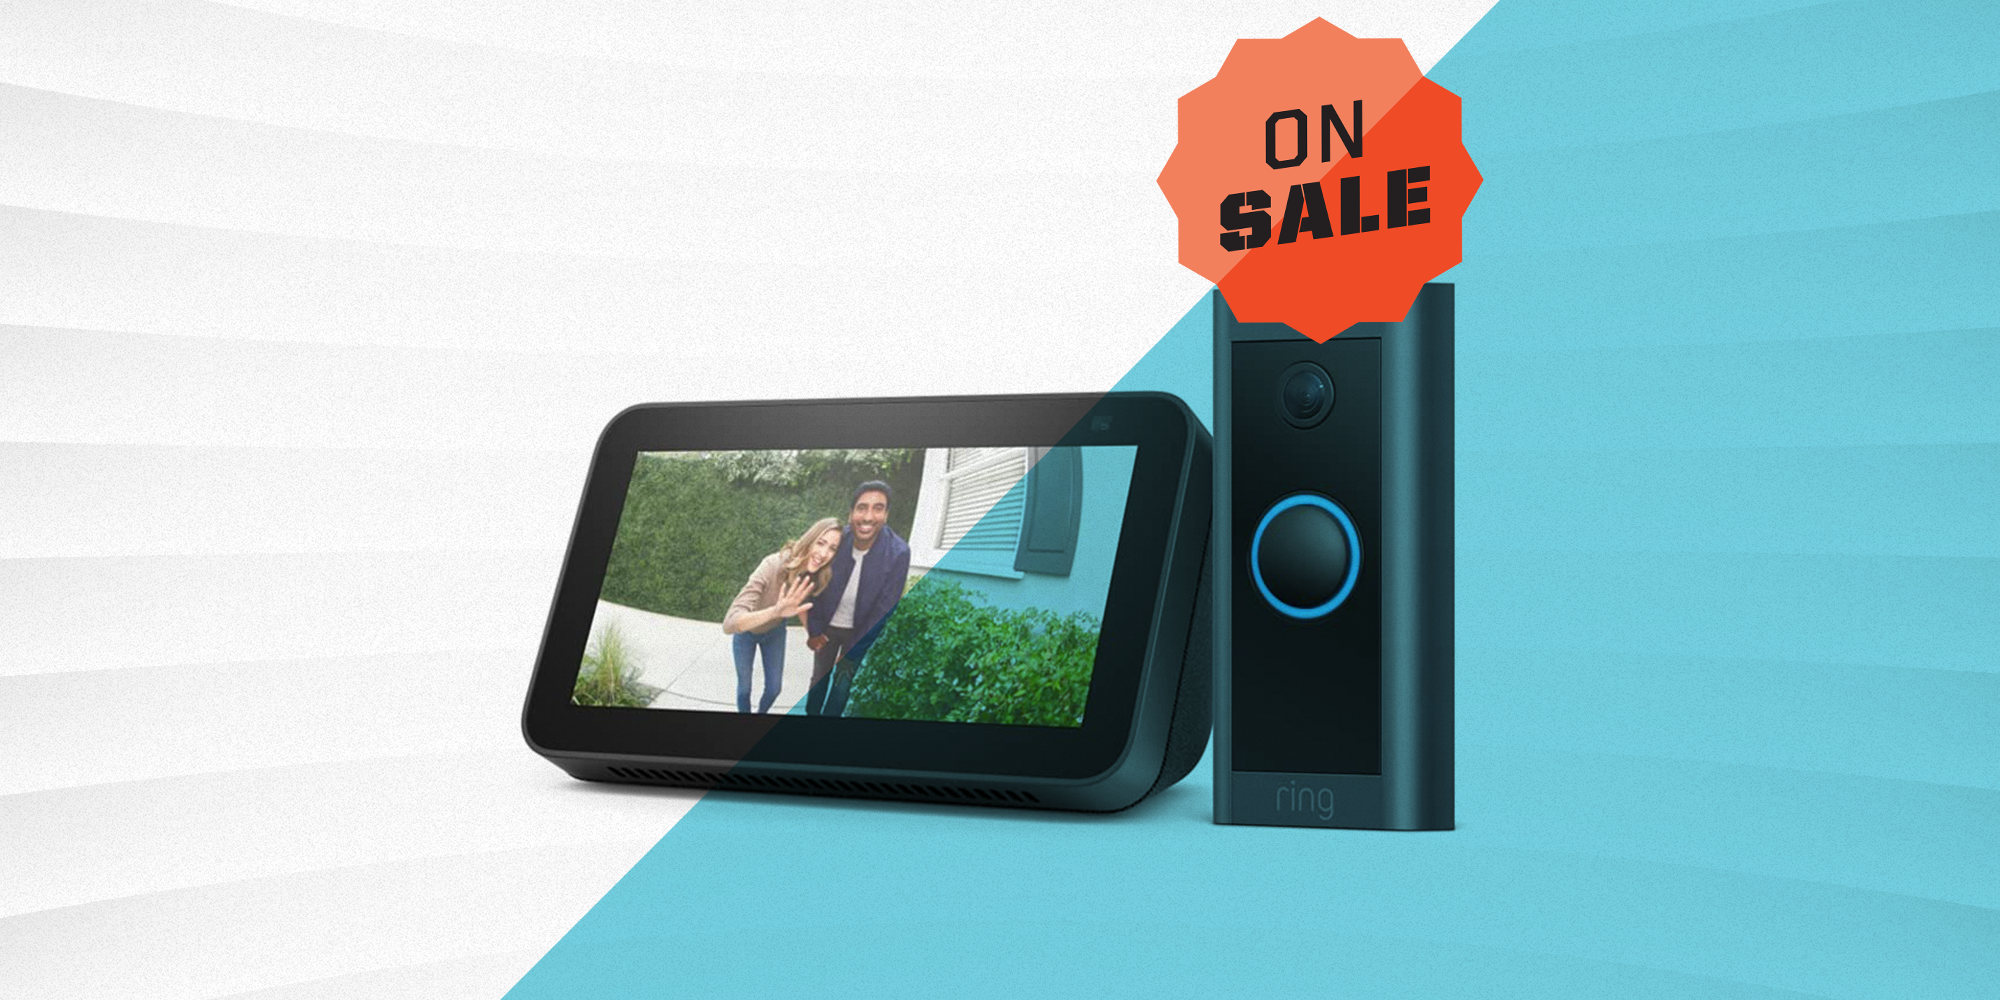 Ring Video Doorbell review: This gadget makes crooks think you're home |  TechHive